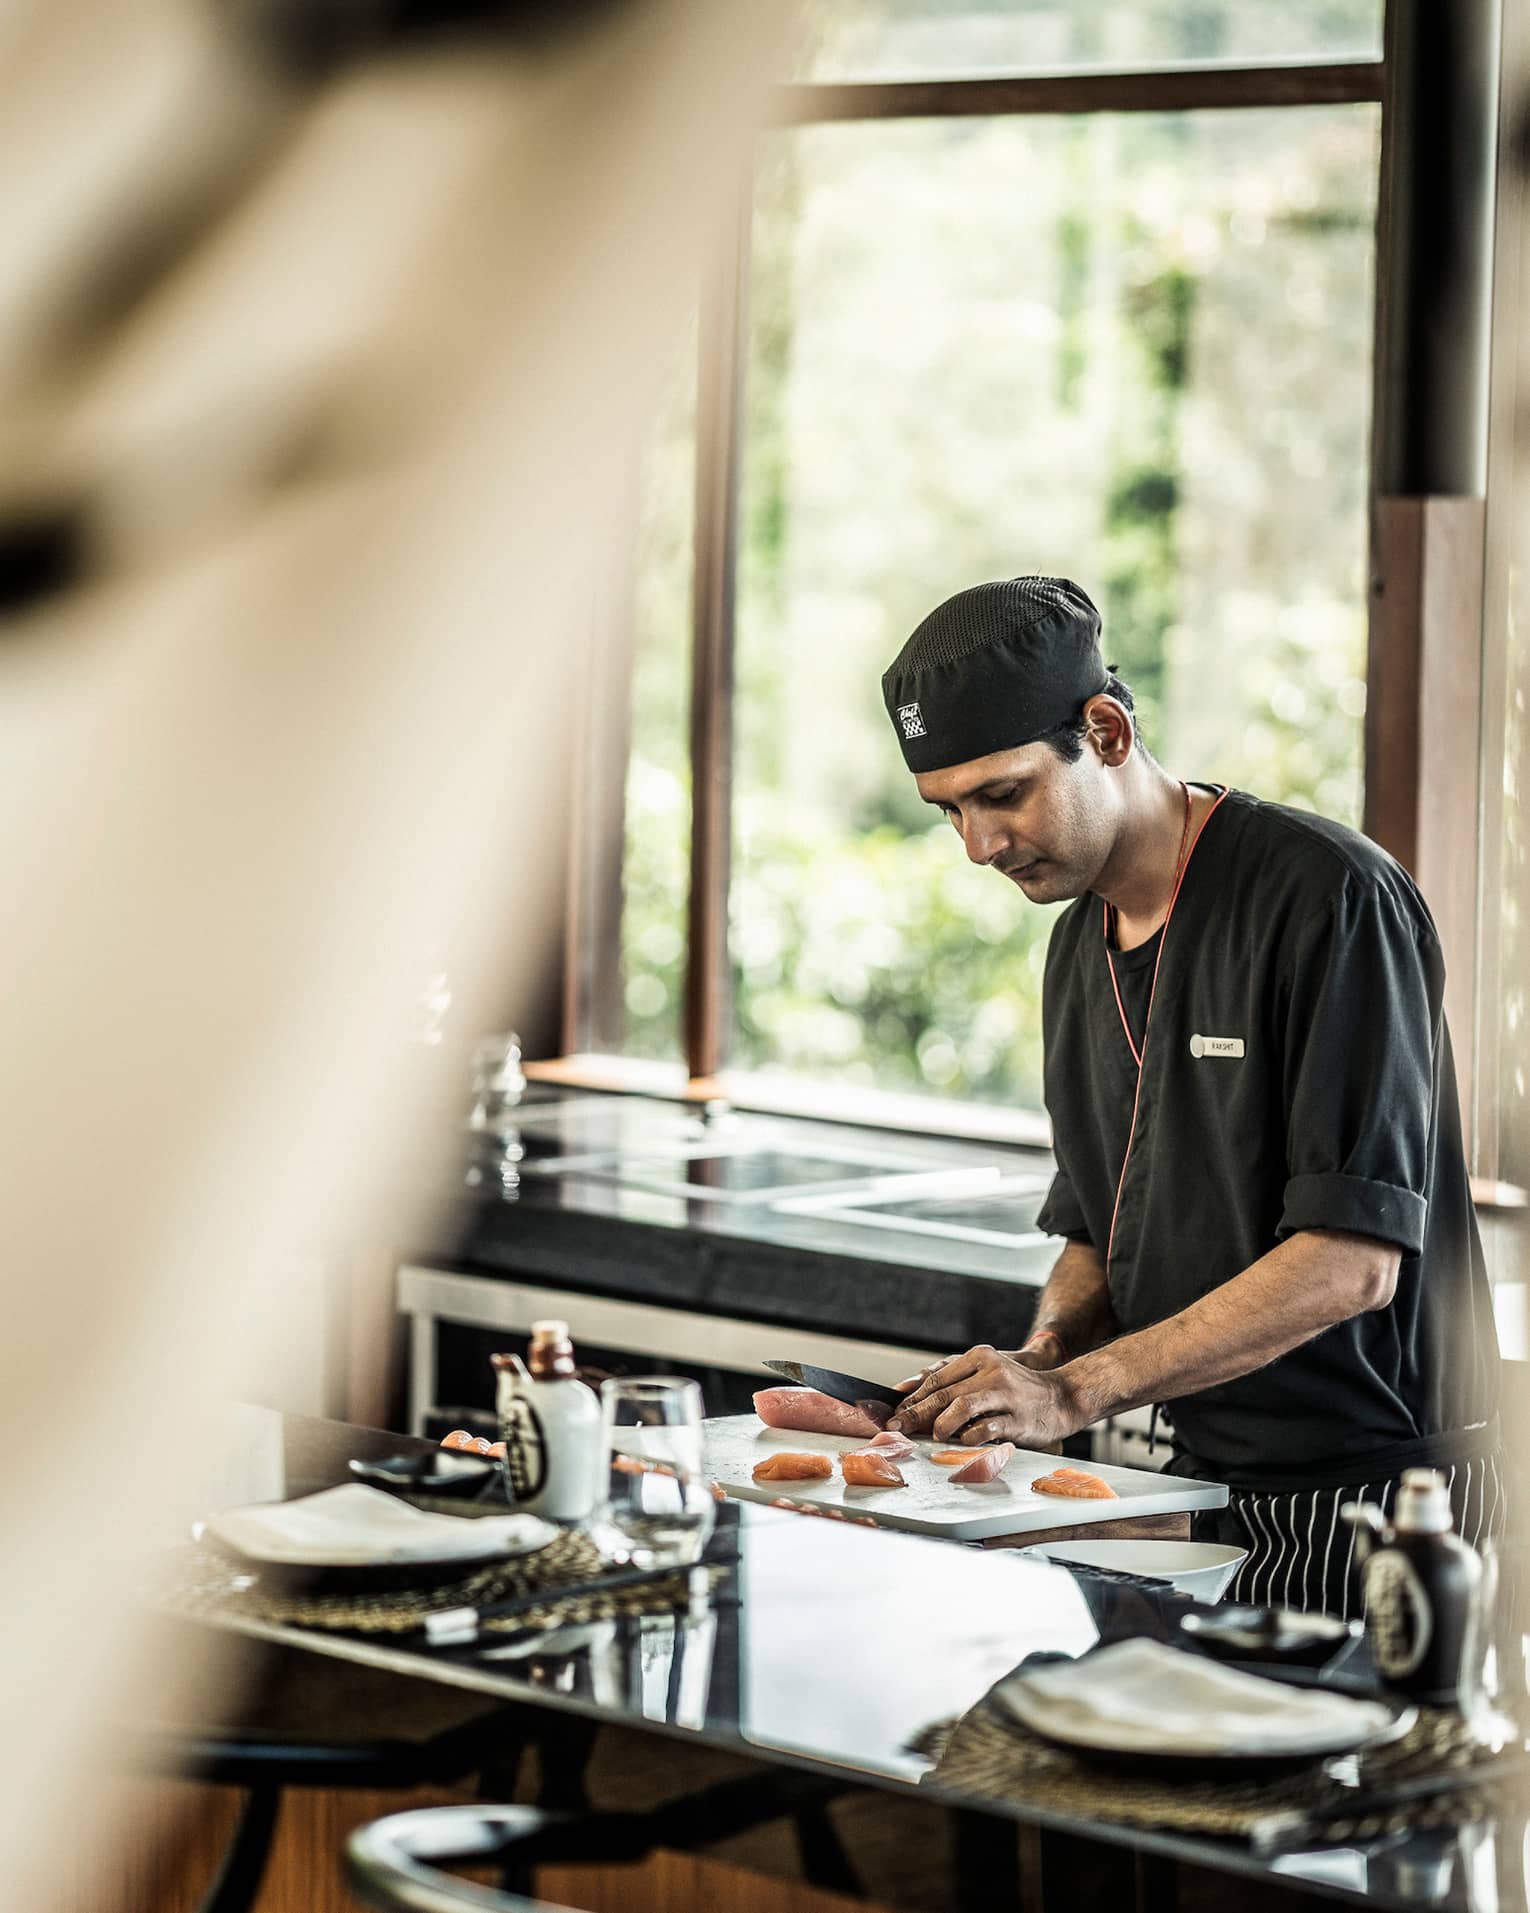 KOI chef prepares sushi at counter in brightly lit room